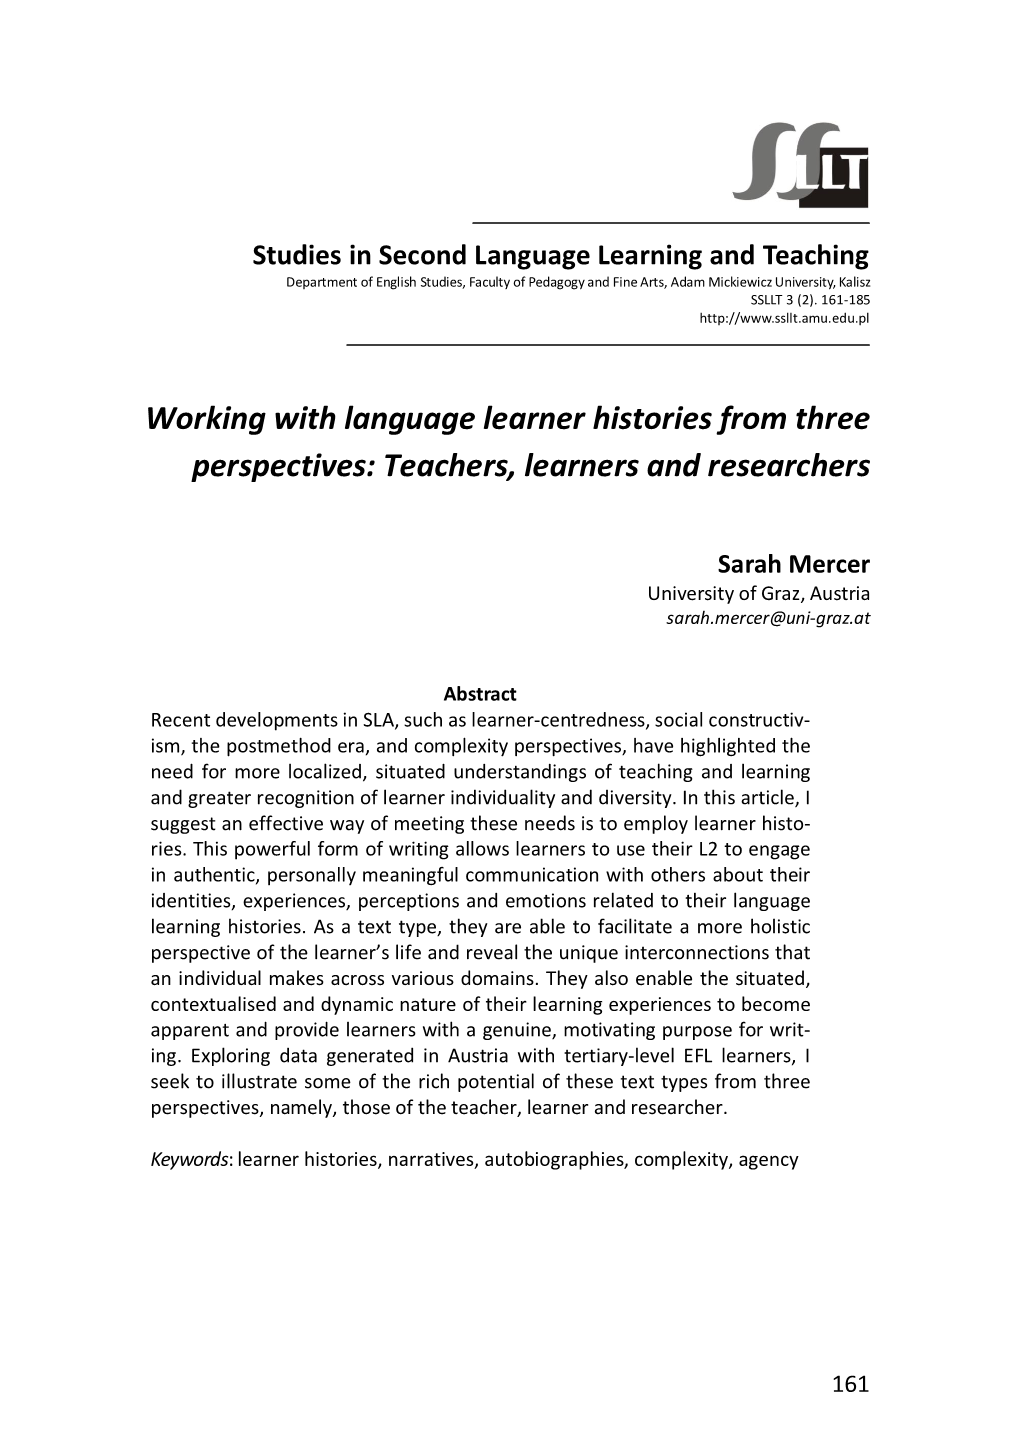 Working with Language Learner Histories from Three Perspectives: Teachers, Learners and Researchers